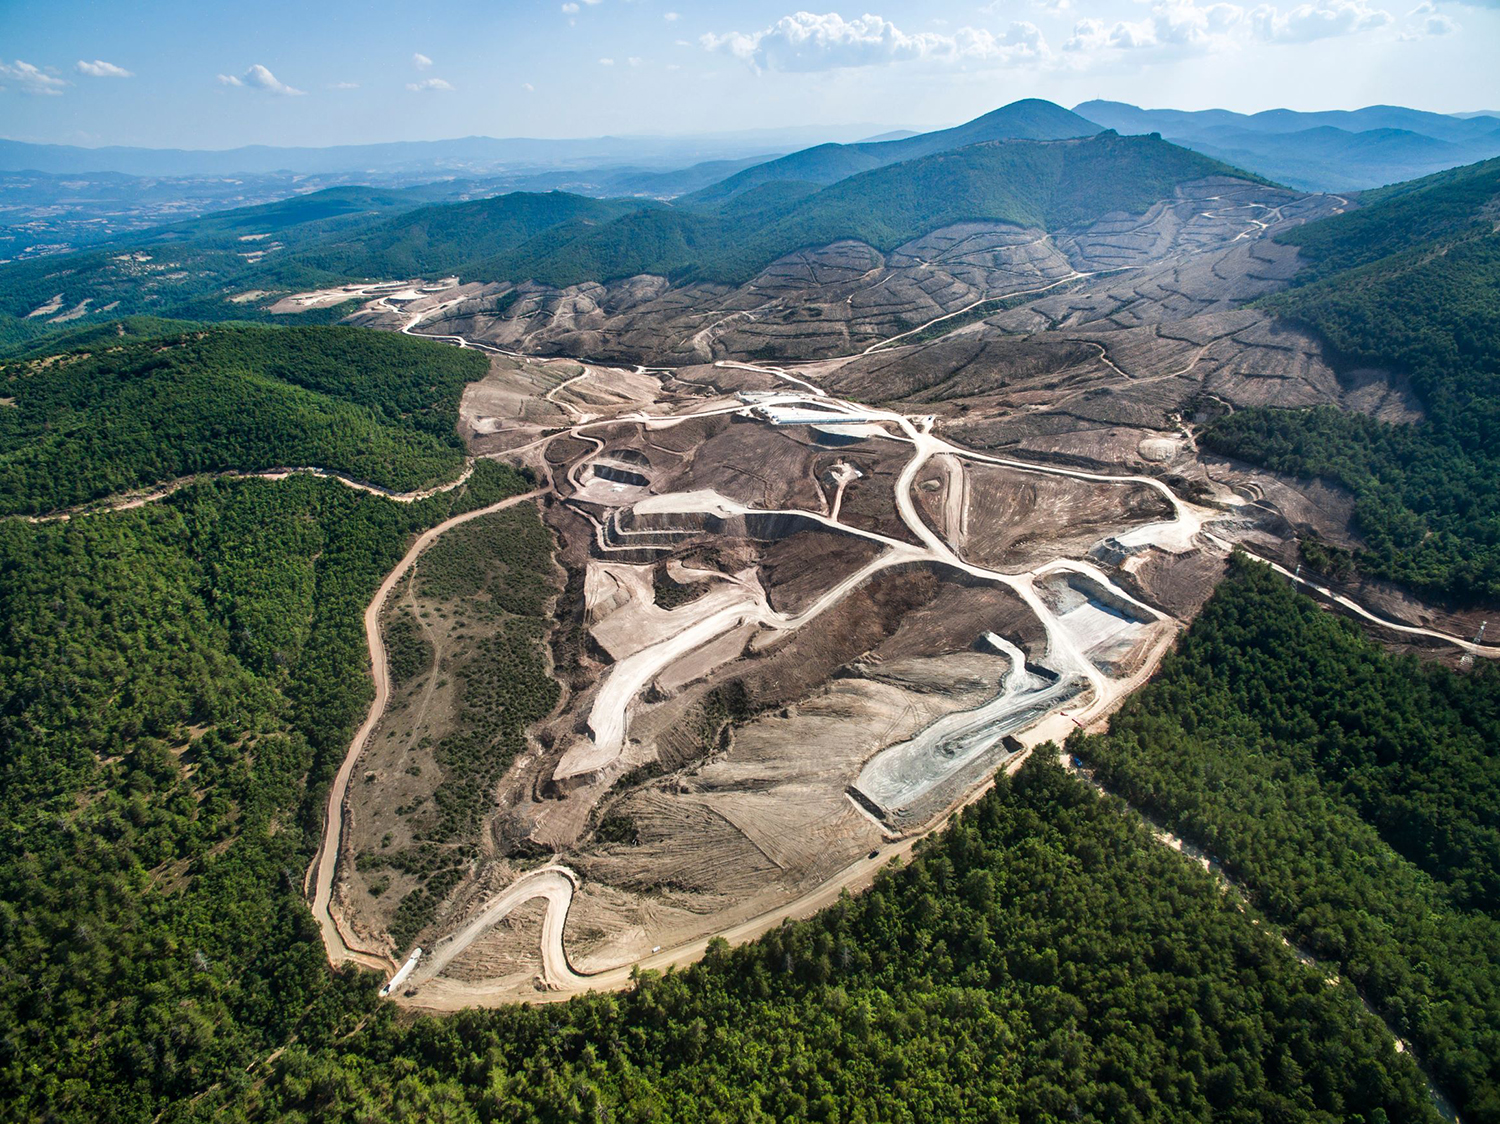 Typical mine site.